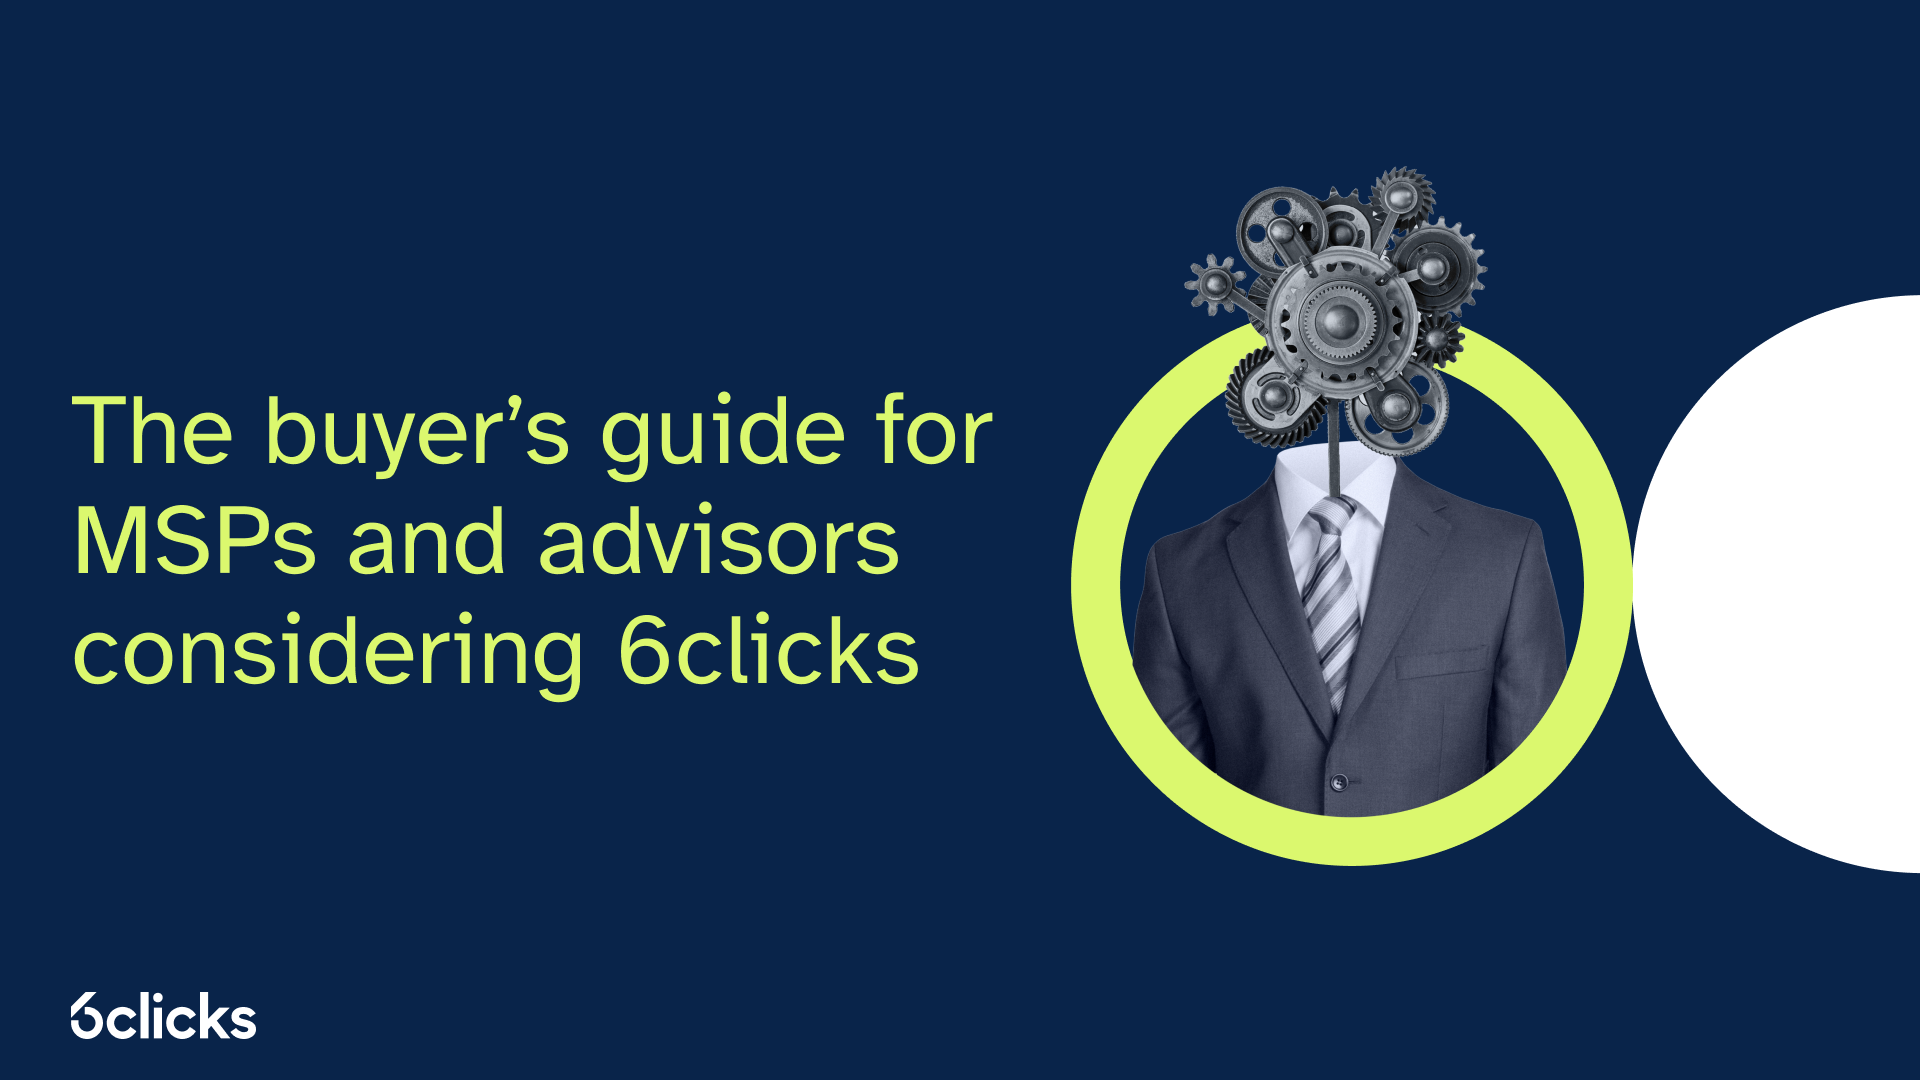 The buyer’s guide for MSPs and advisors considering 6clicks